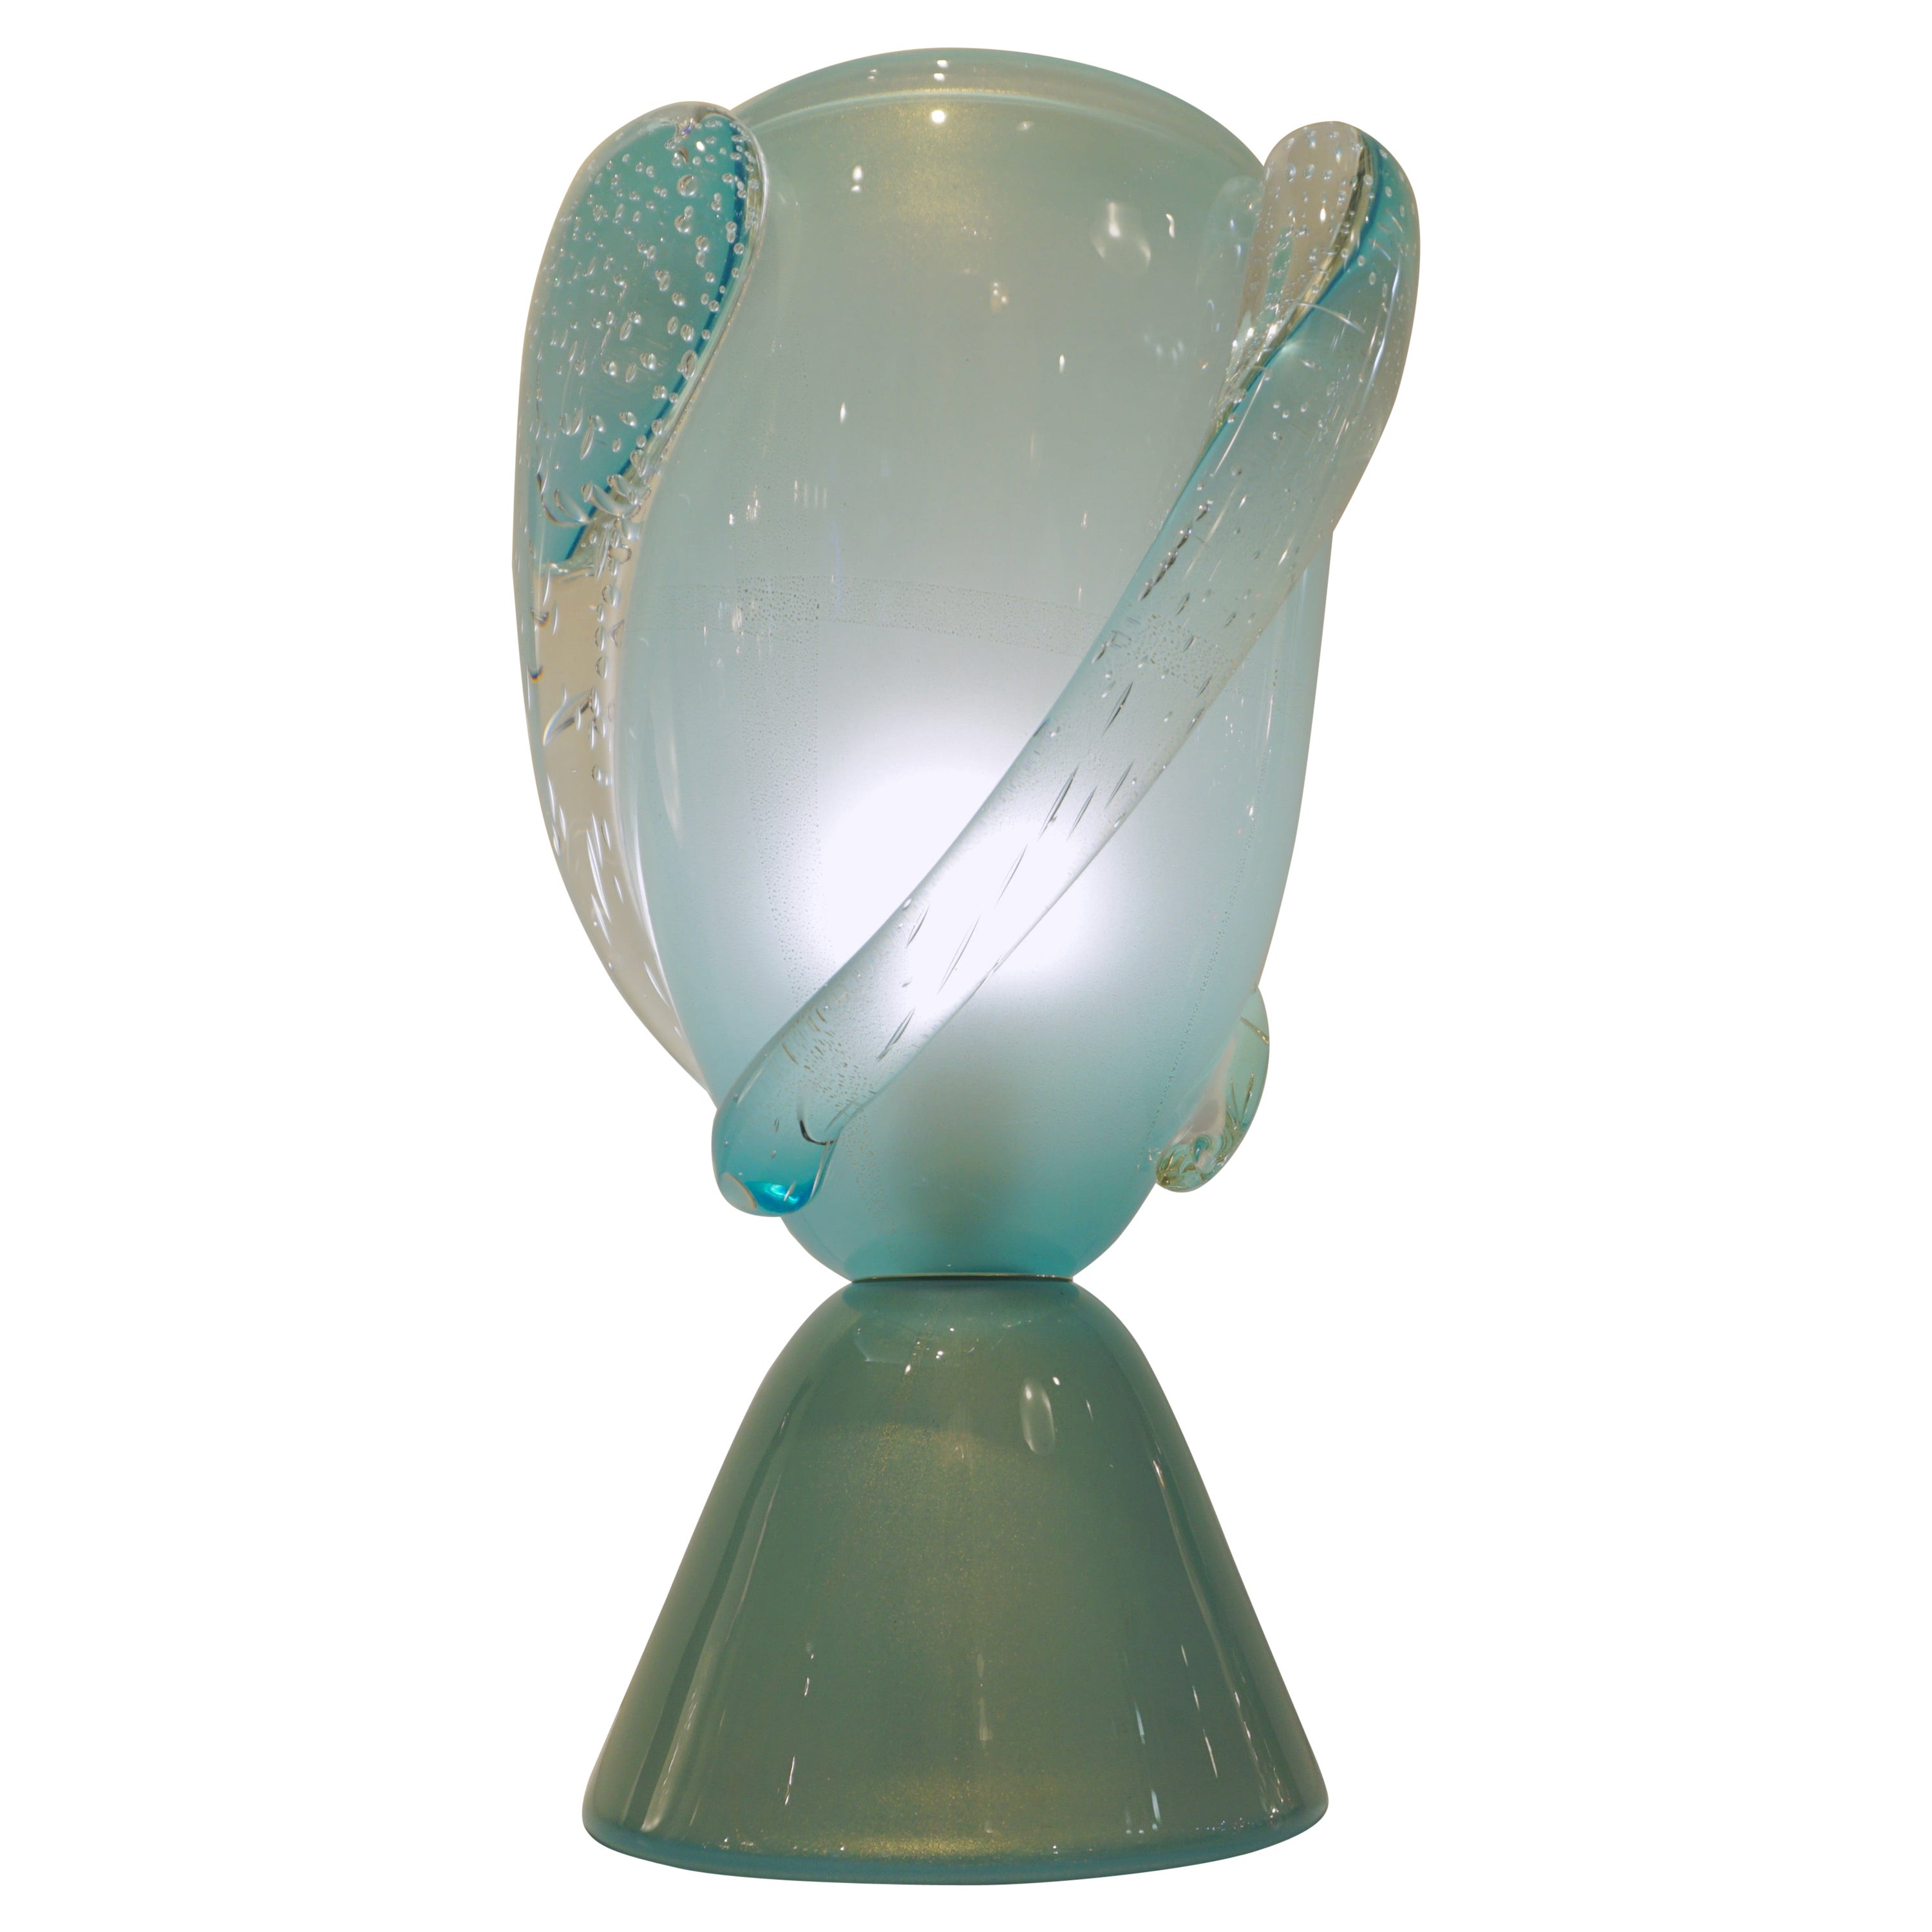 High-quality Italian mouth-blown Murano glass table lamp signed Barovier-Toso in a rare baby aquamarine azure color, worked with 24Kt Gold dust to confer glowing to the glass. The sea blue is gradual from a lighter shade to a more intense